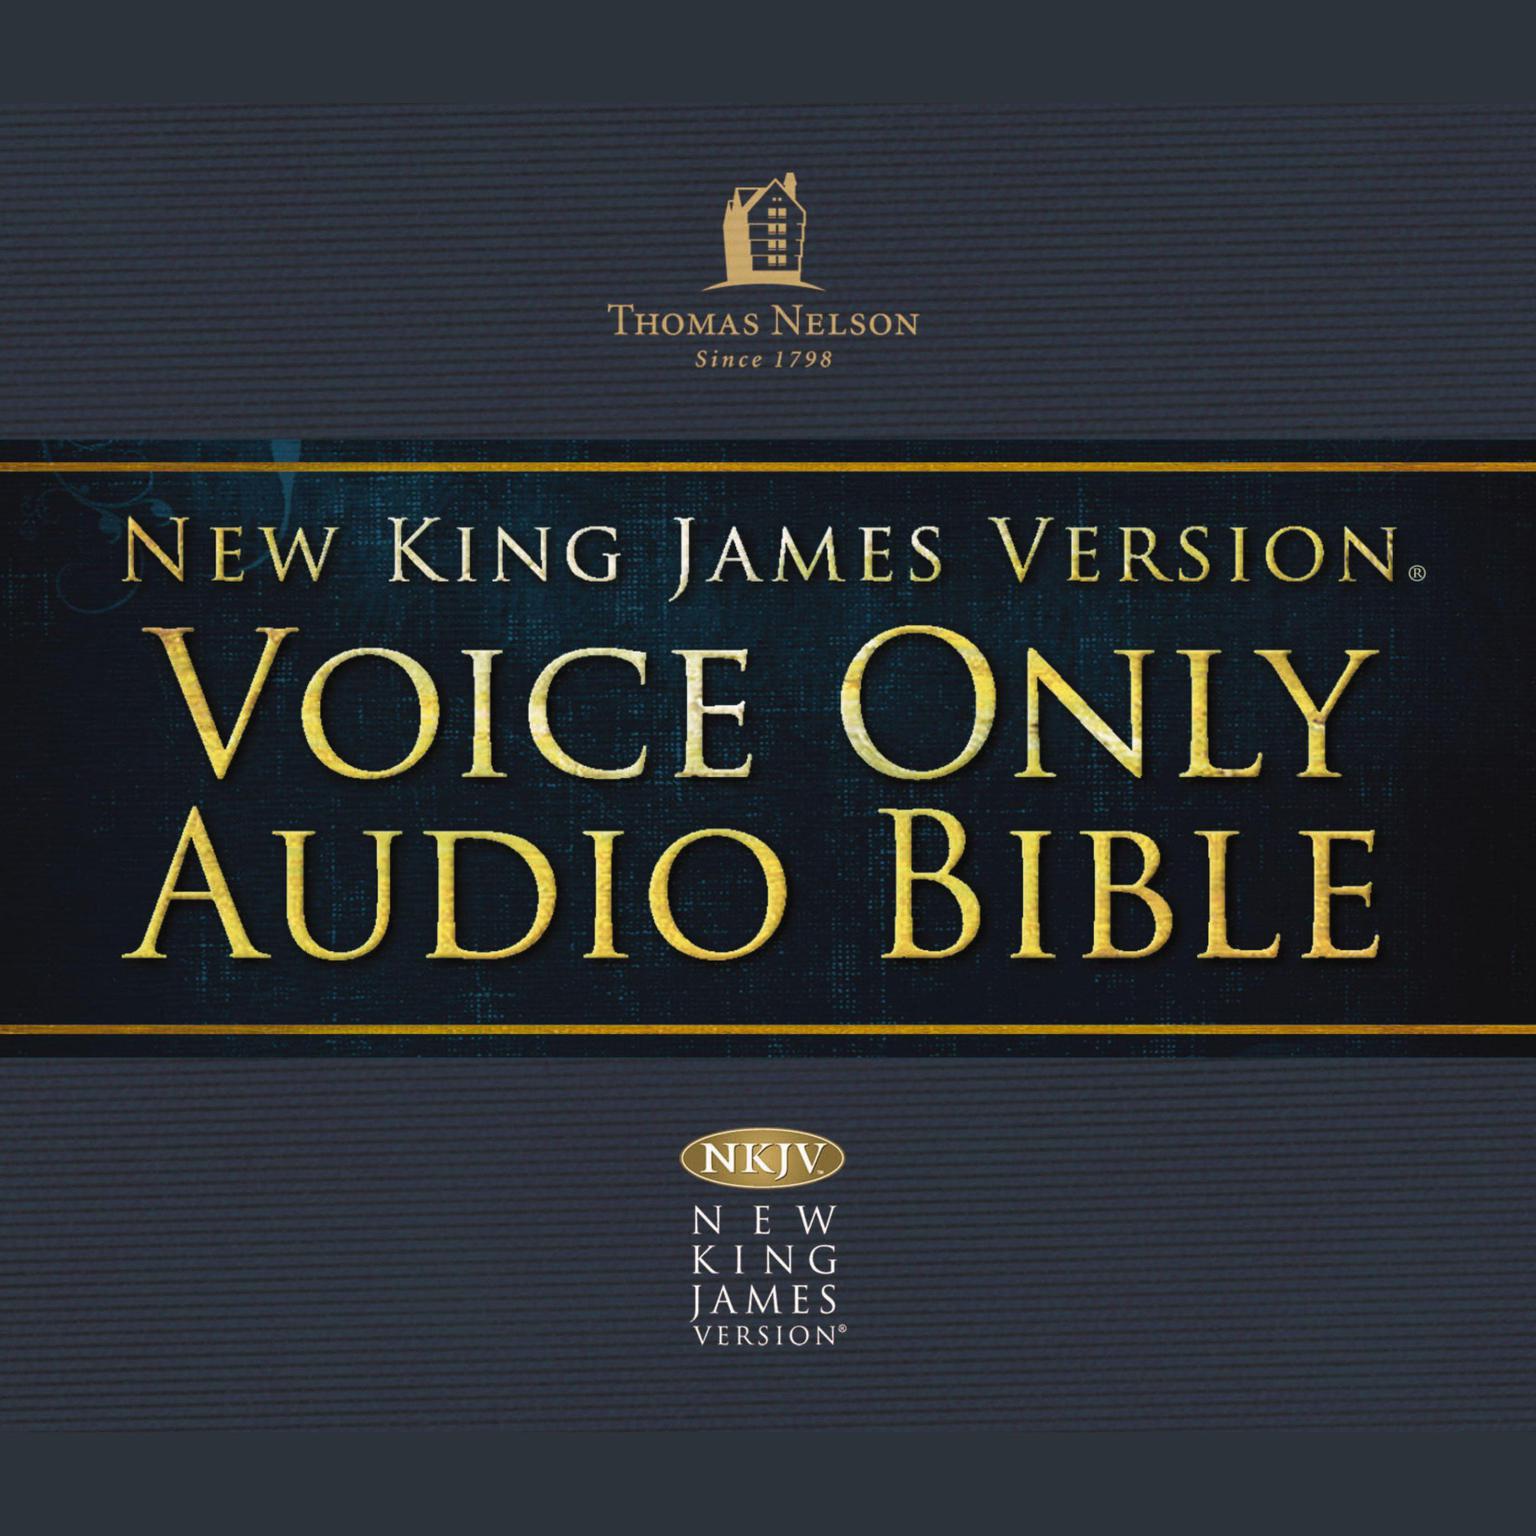 Voice Only Audio Bible - New King James Version, NKJV (Narrated by Bob Souer): (14) Ezra, Nehemiah, and Esther: Holy Bible, New King James Version Audiobook, by Thomas Nelson